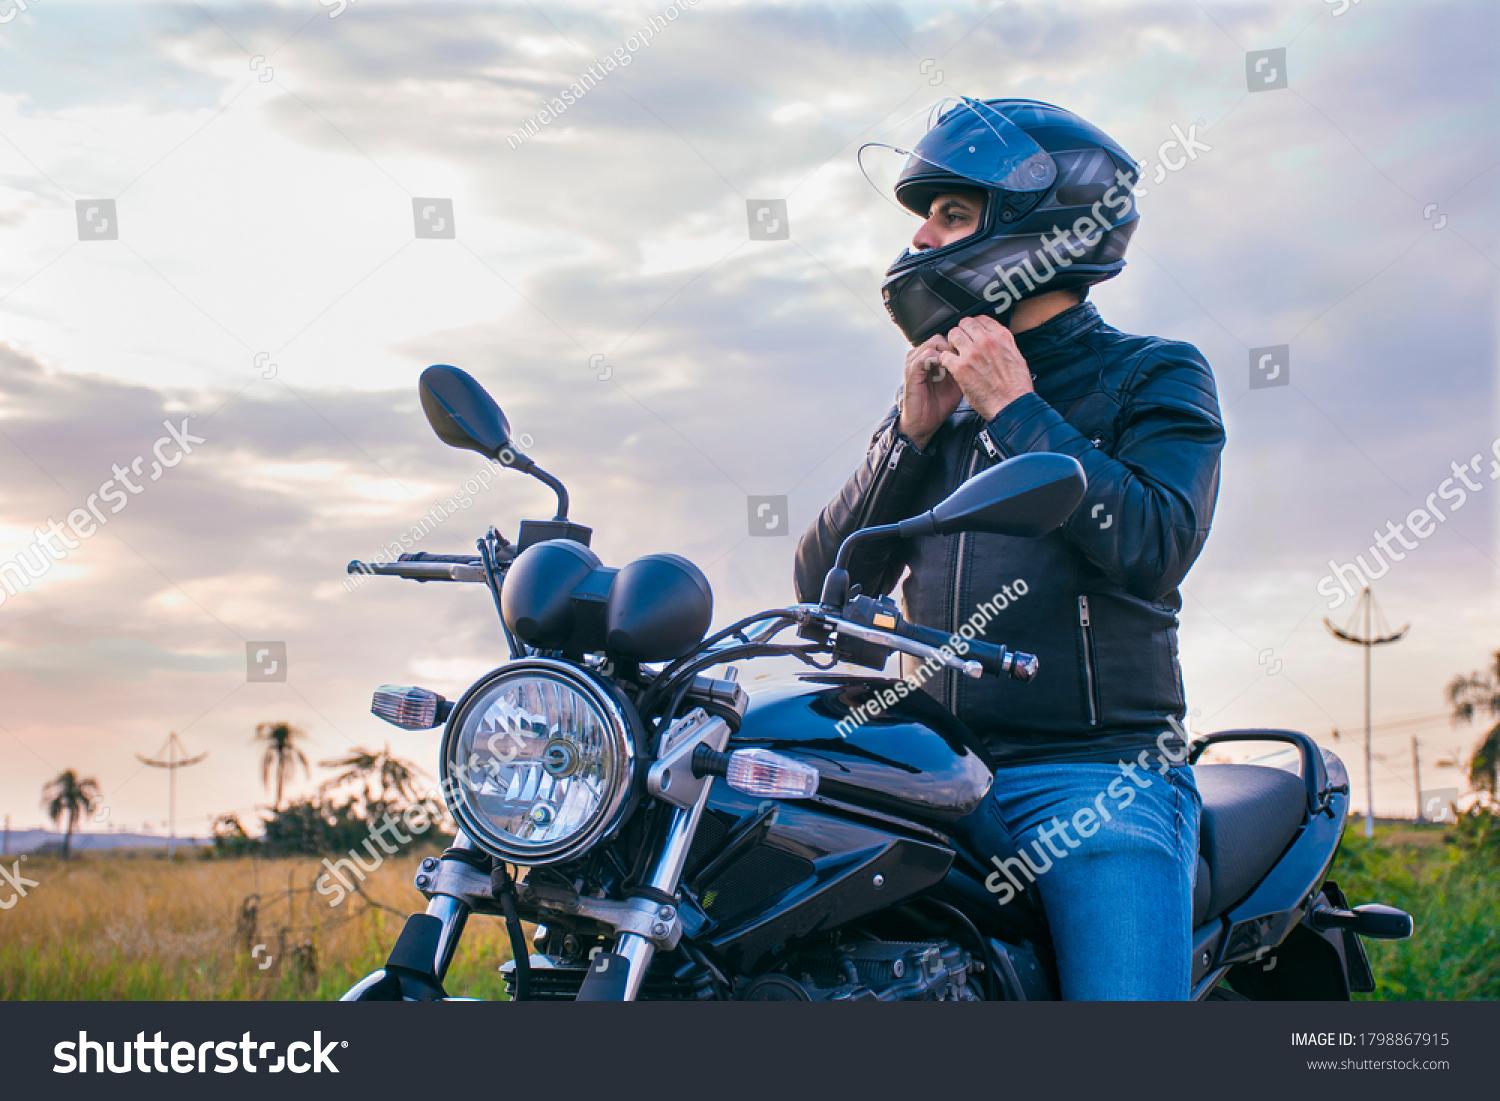 Man sitting on a motorcycle, wearing jeans and a black jacket, fastening his helmet with a landscape in the background. #1798867915